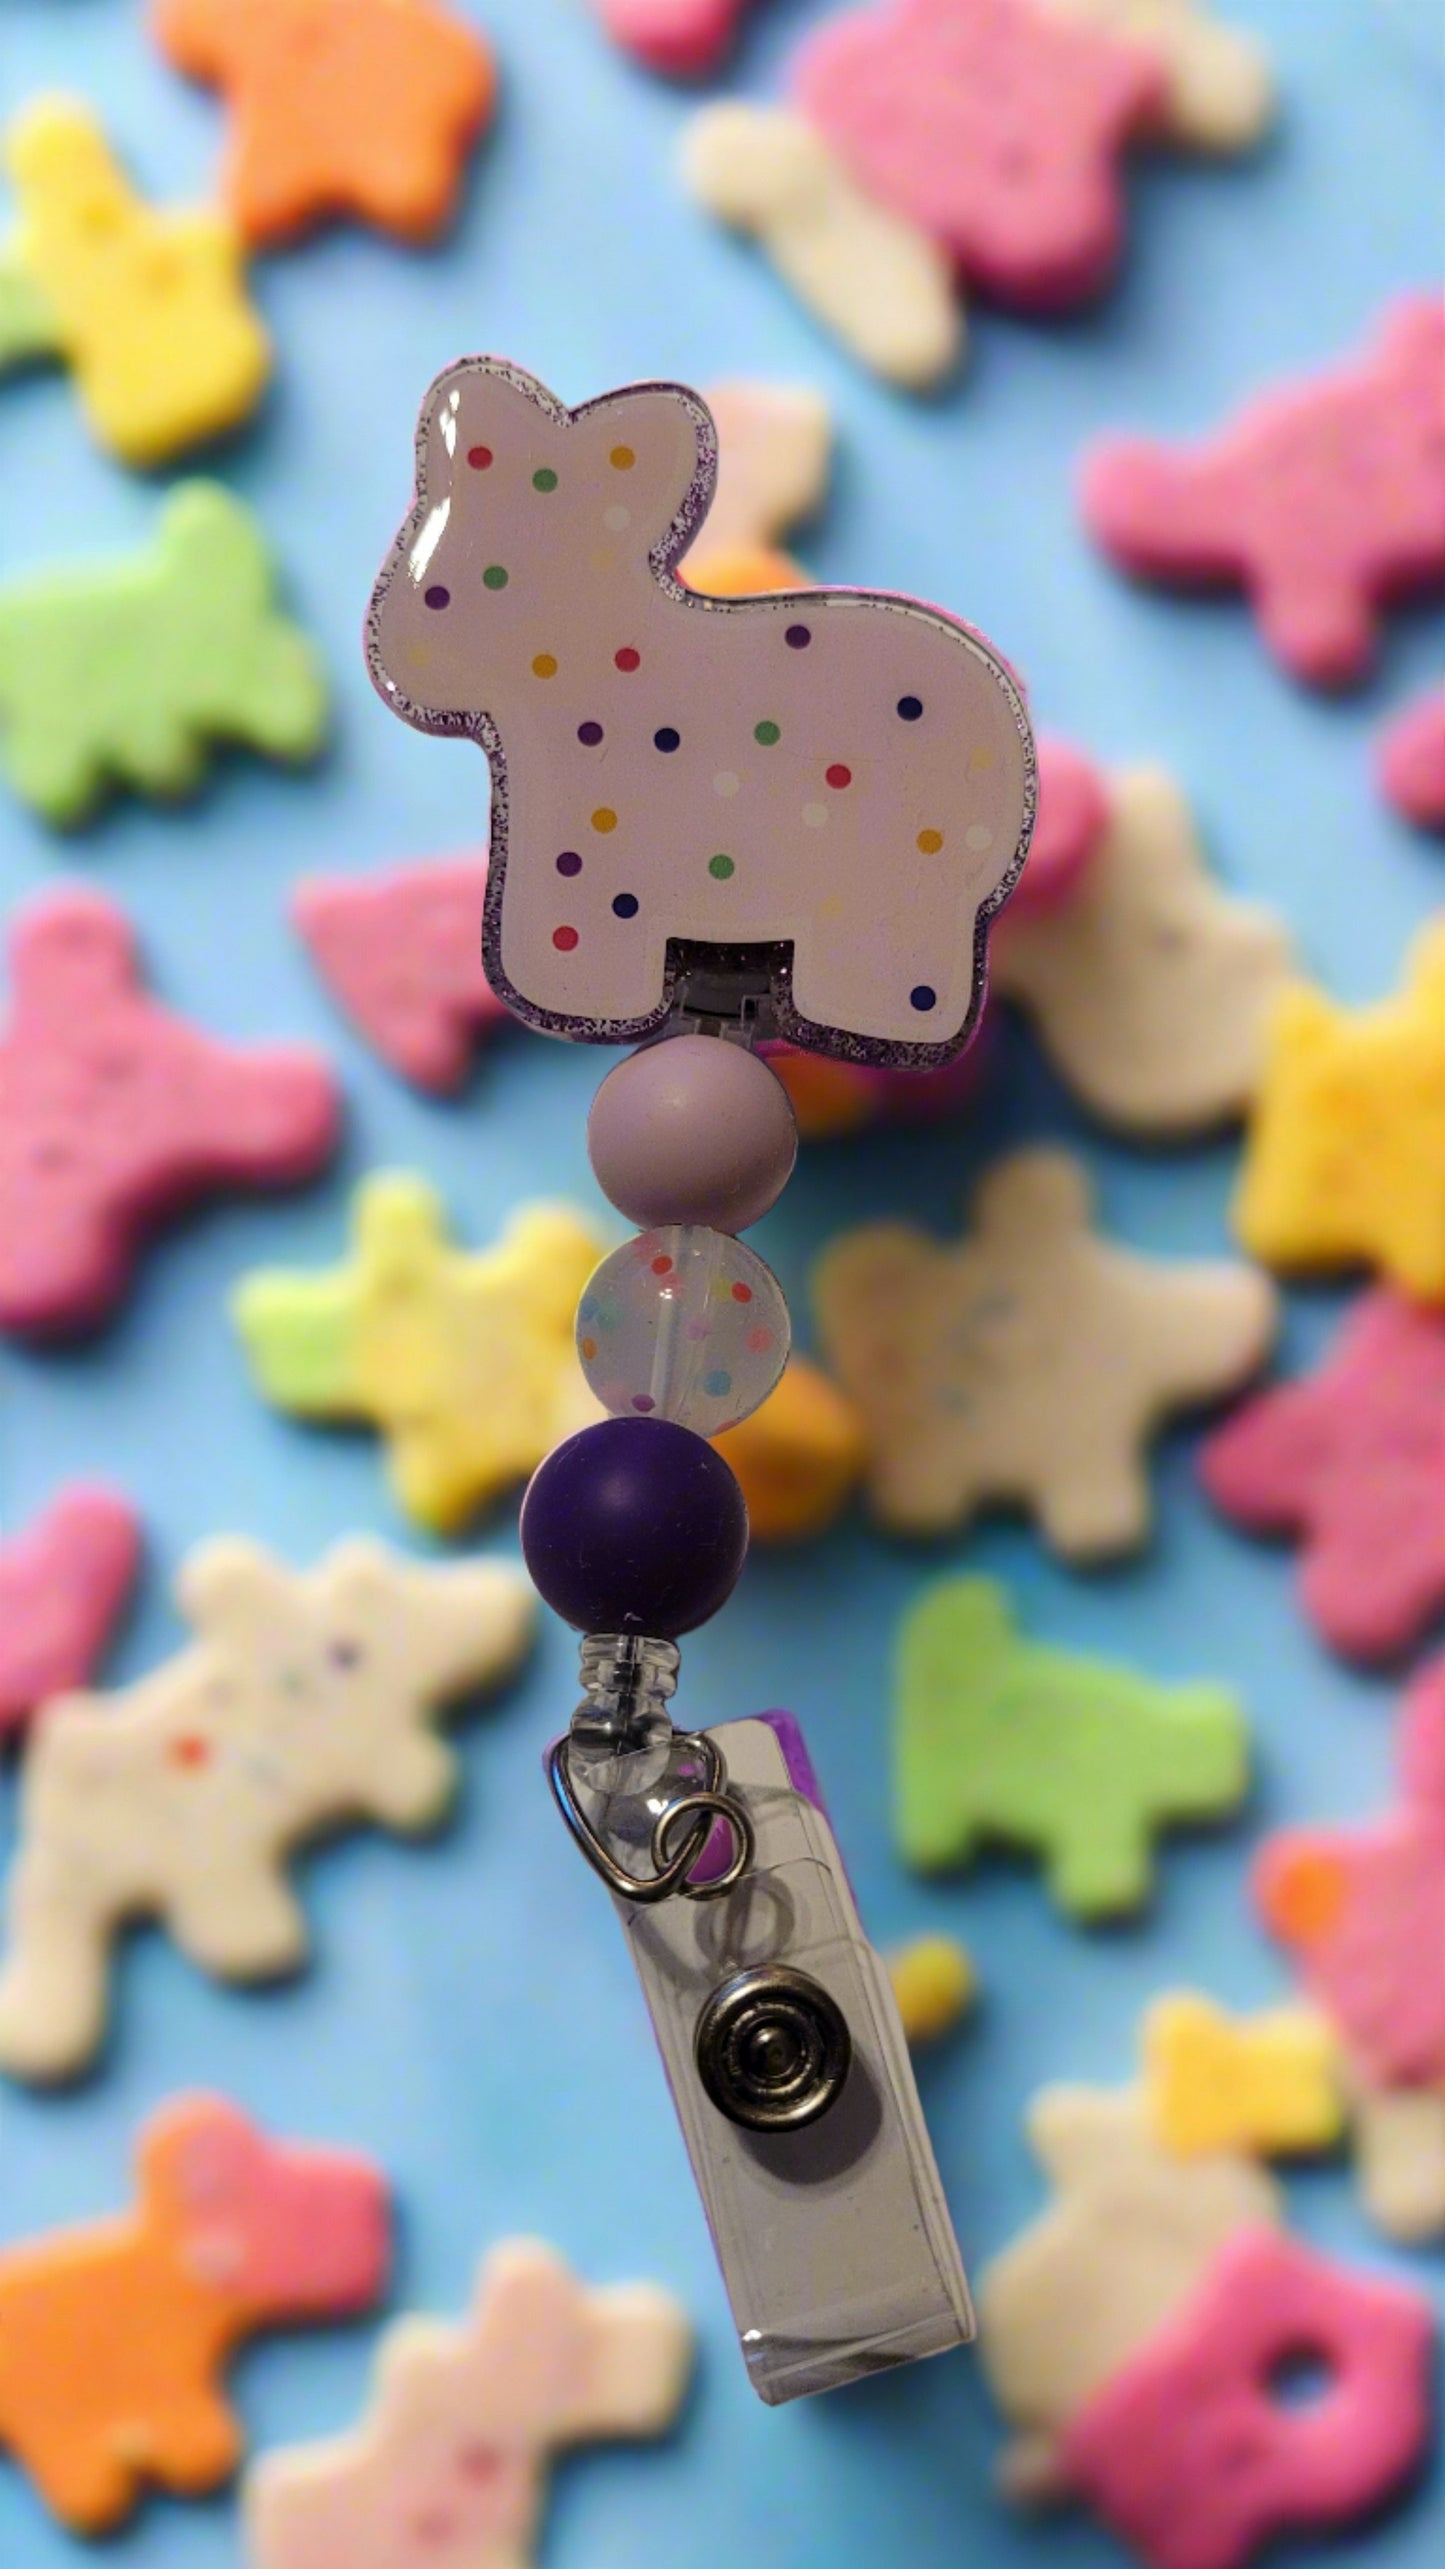 Frosted animal crackers with sprinkles are brought to life in these delicious Badge Reels! Our first offering is the stubborn yet adorable donkey - pick from a variety of colors and complementing silicone accent beads.